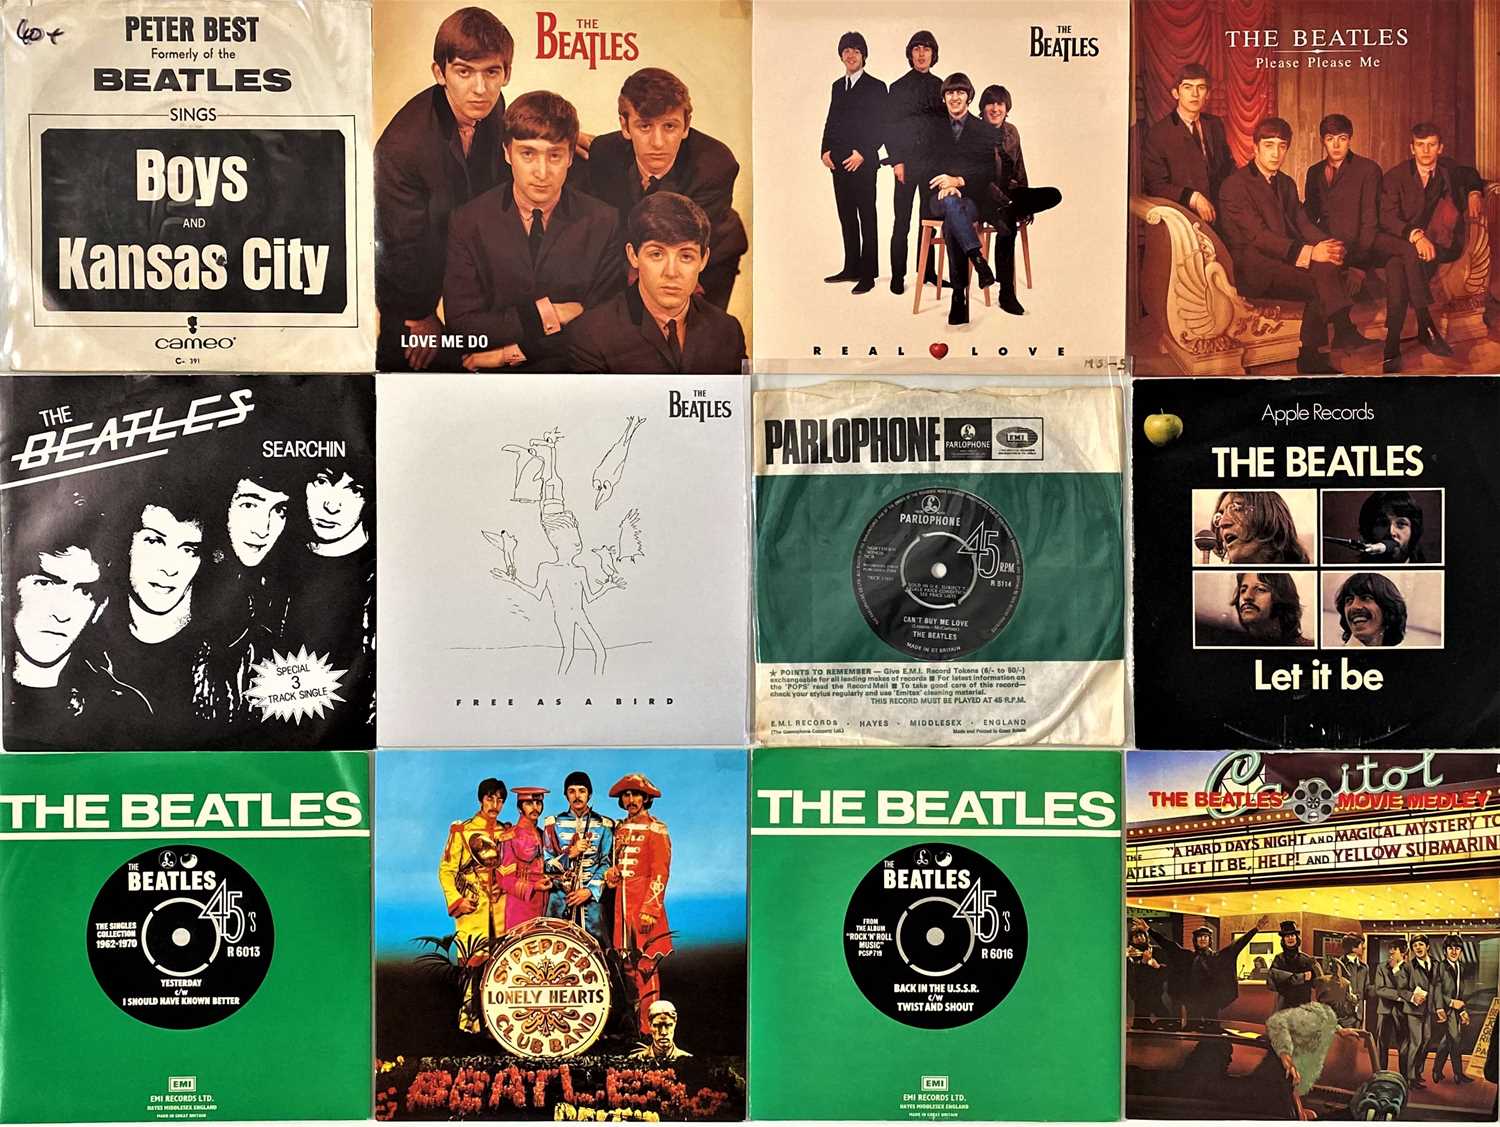 Lot 48 - THE BEATLES - 7" COLLECTION (INC BOX SET)